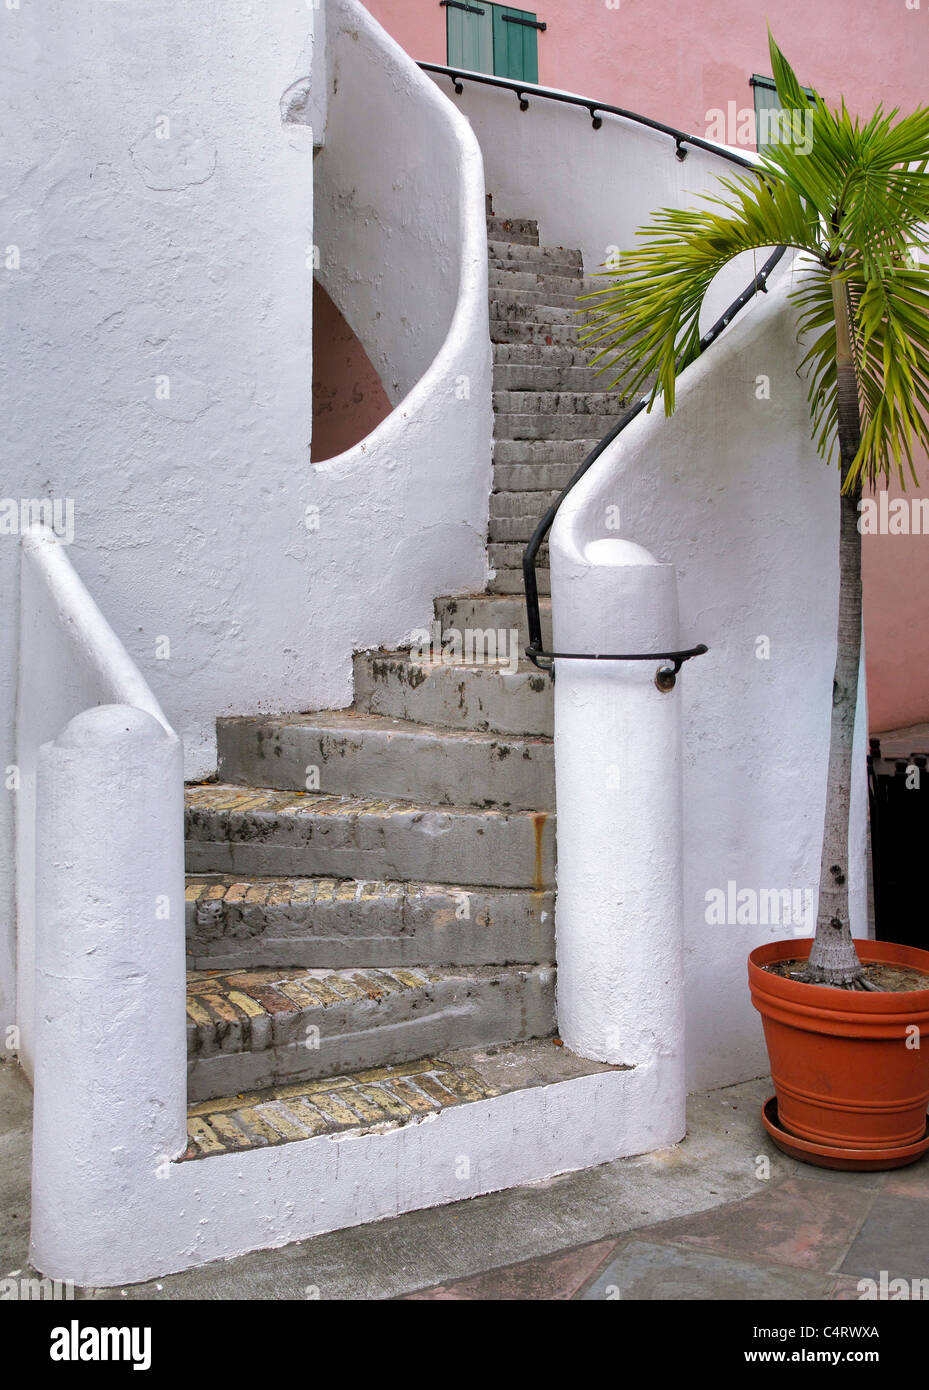 Old stairs in St. Thomas. Virgin Islands Stock Photo